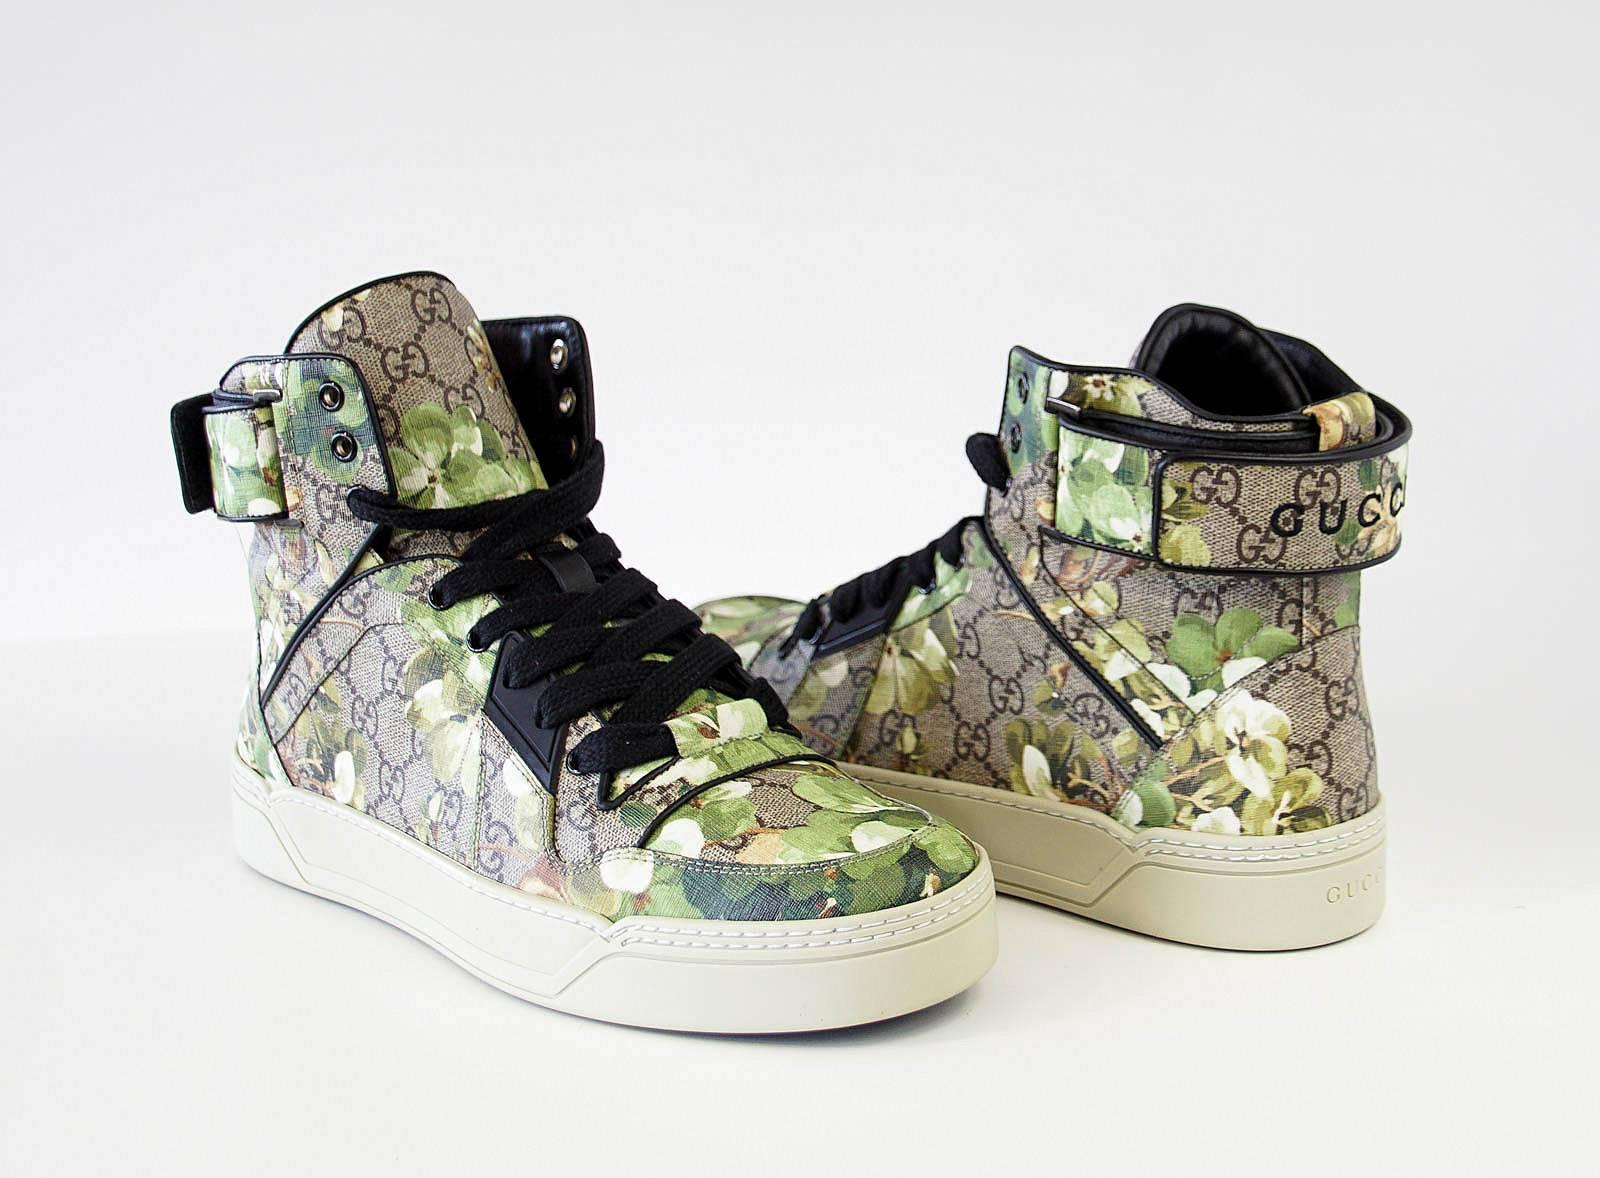 gucci bloom high top sneakers